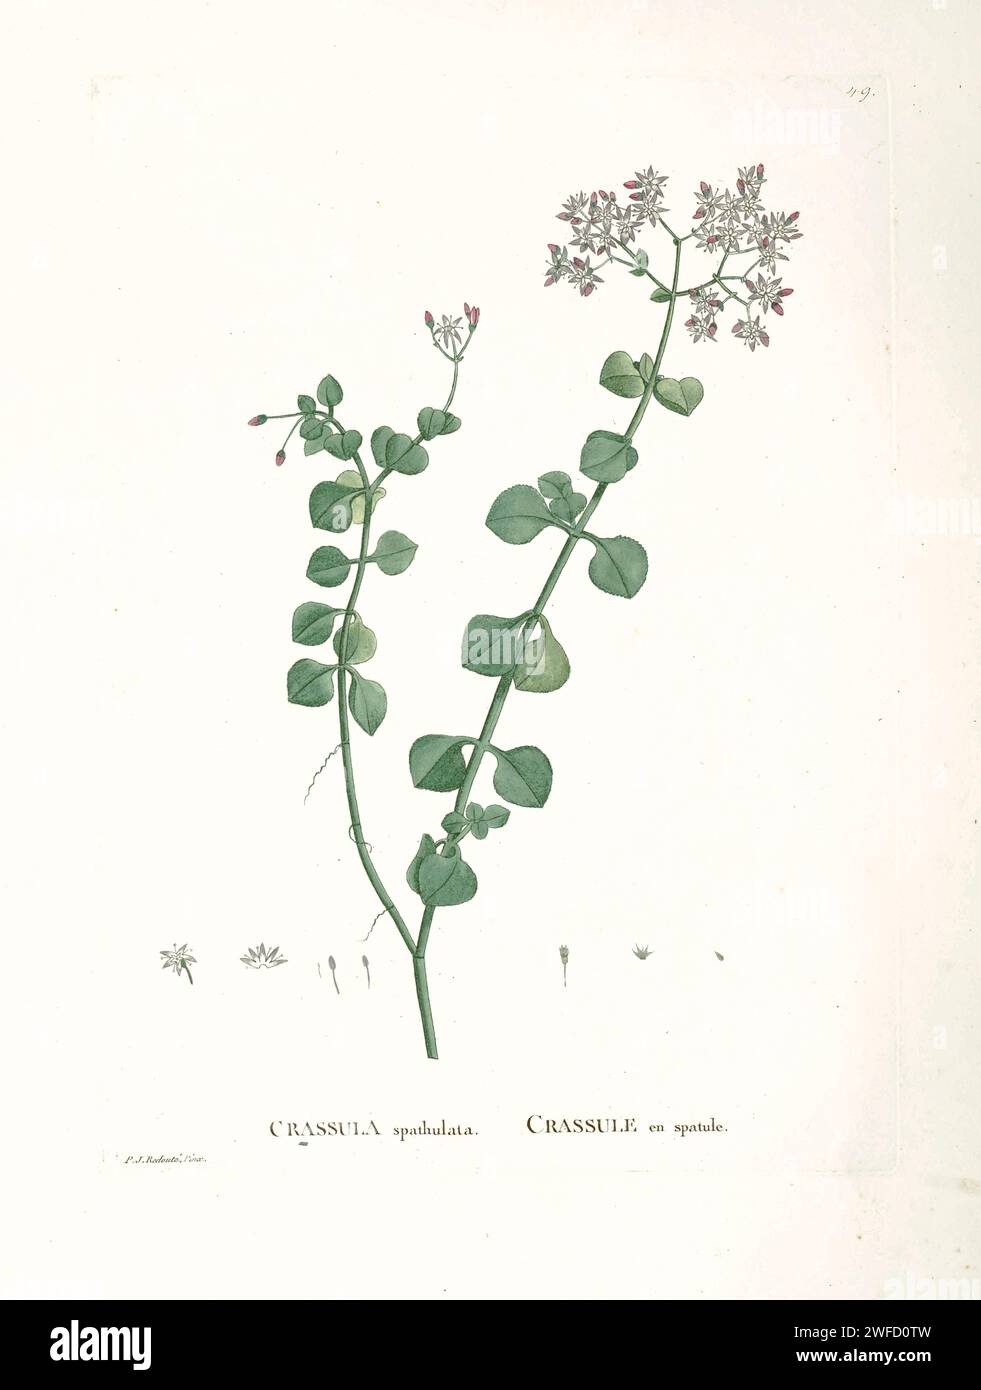 Crassula spathulata from History of Succulent Plants [Plantarum historia succulentarum / Histoire des plantes grasses] painted by Pierre-Joseph Redouté and described by Augustin Pyramus de Candolle Crassula spathulata is a creeping, succulent ground-cover, indigenous to the Eastern Cape Province of South Africa, where it is found in leaf-litter on rocky ridges, often around the edges of forests. Stock Photo